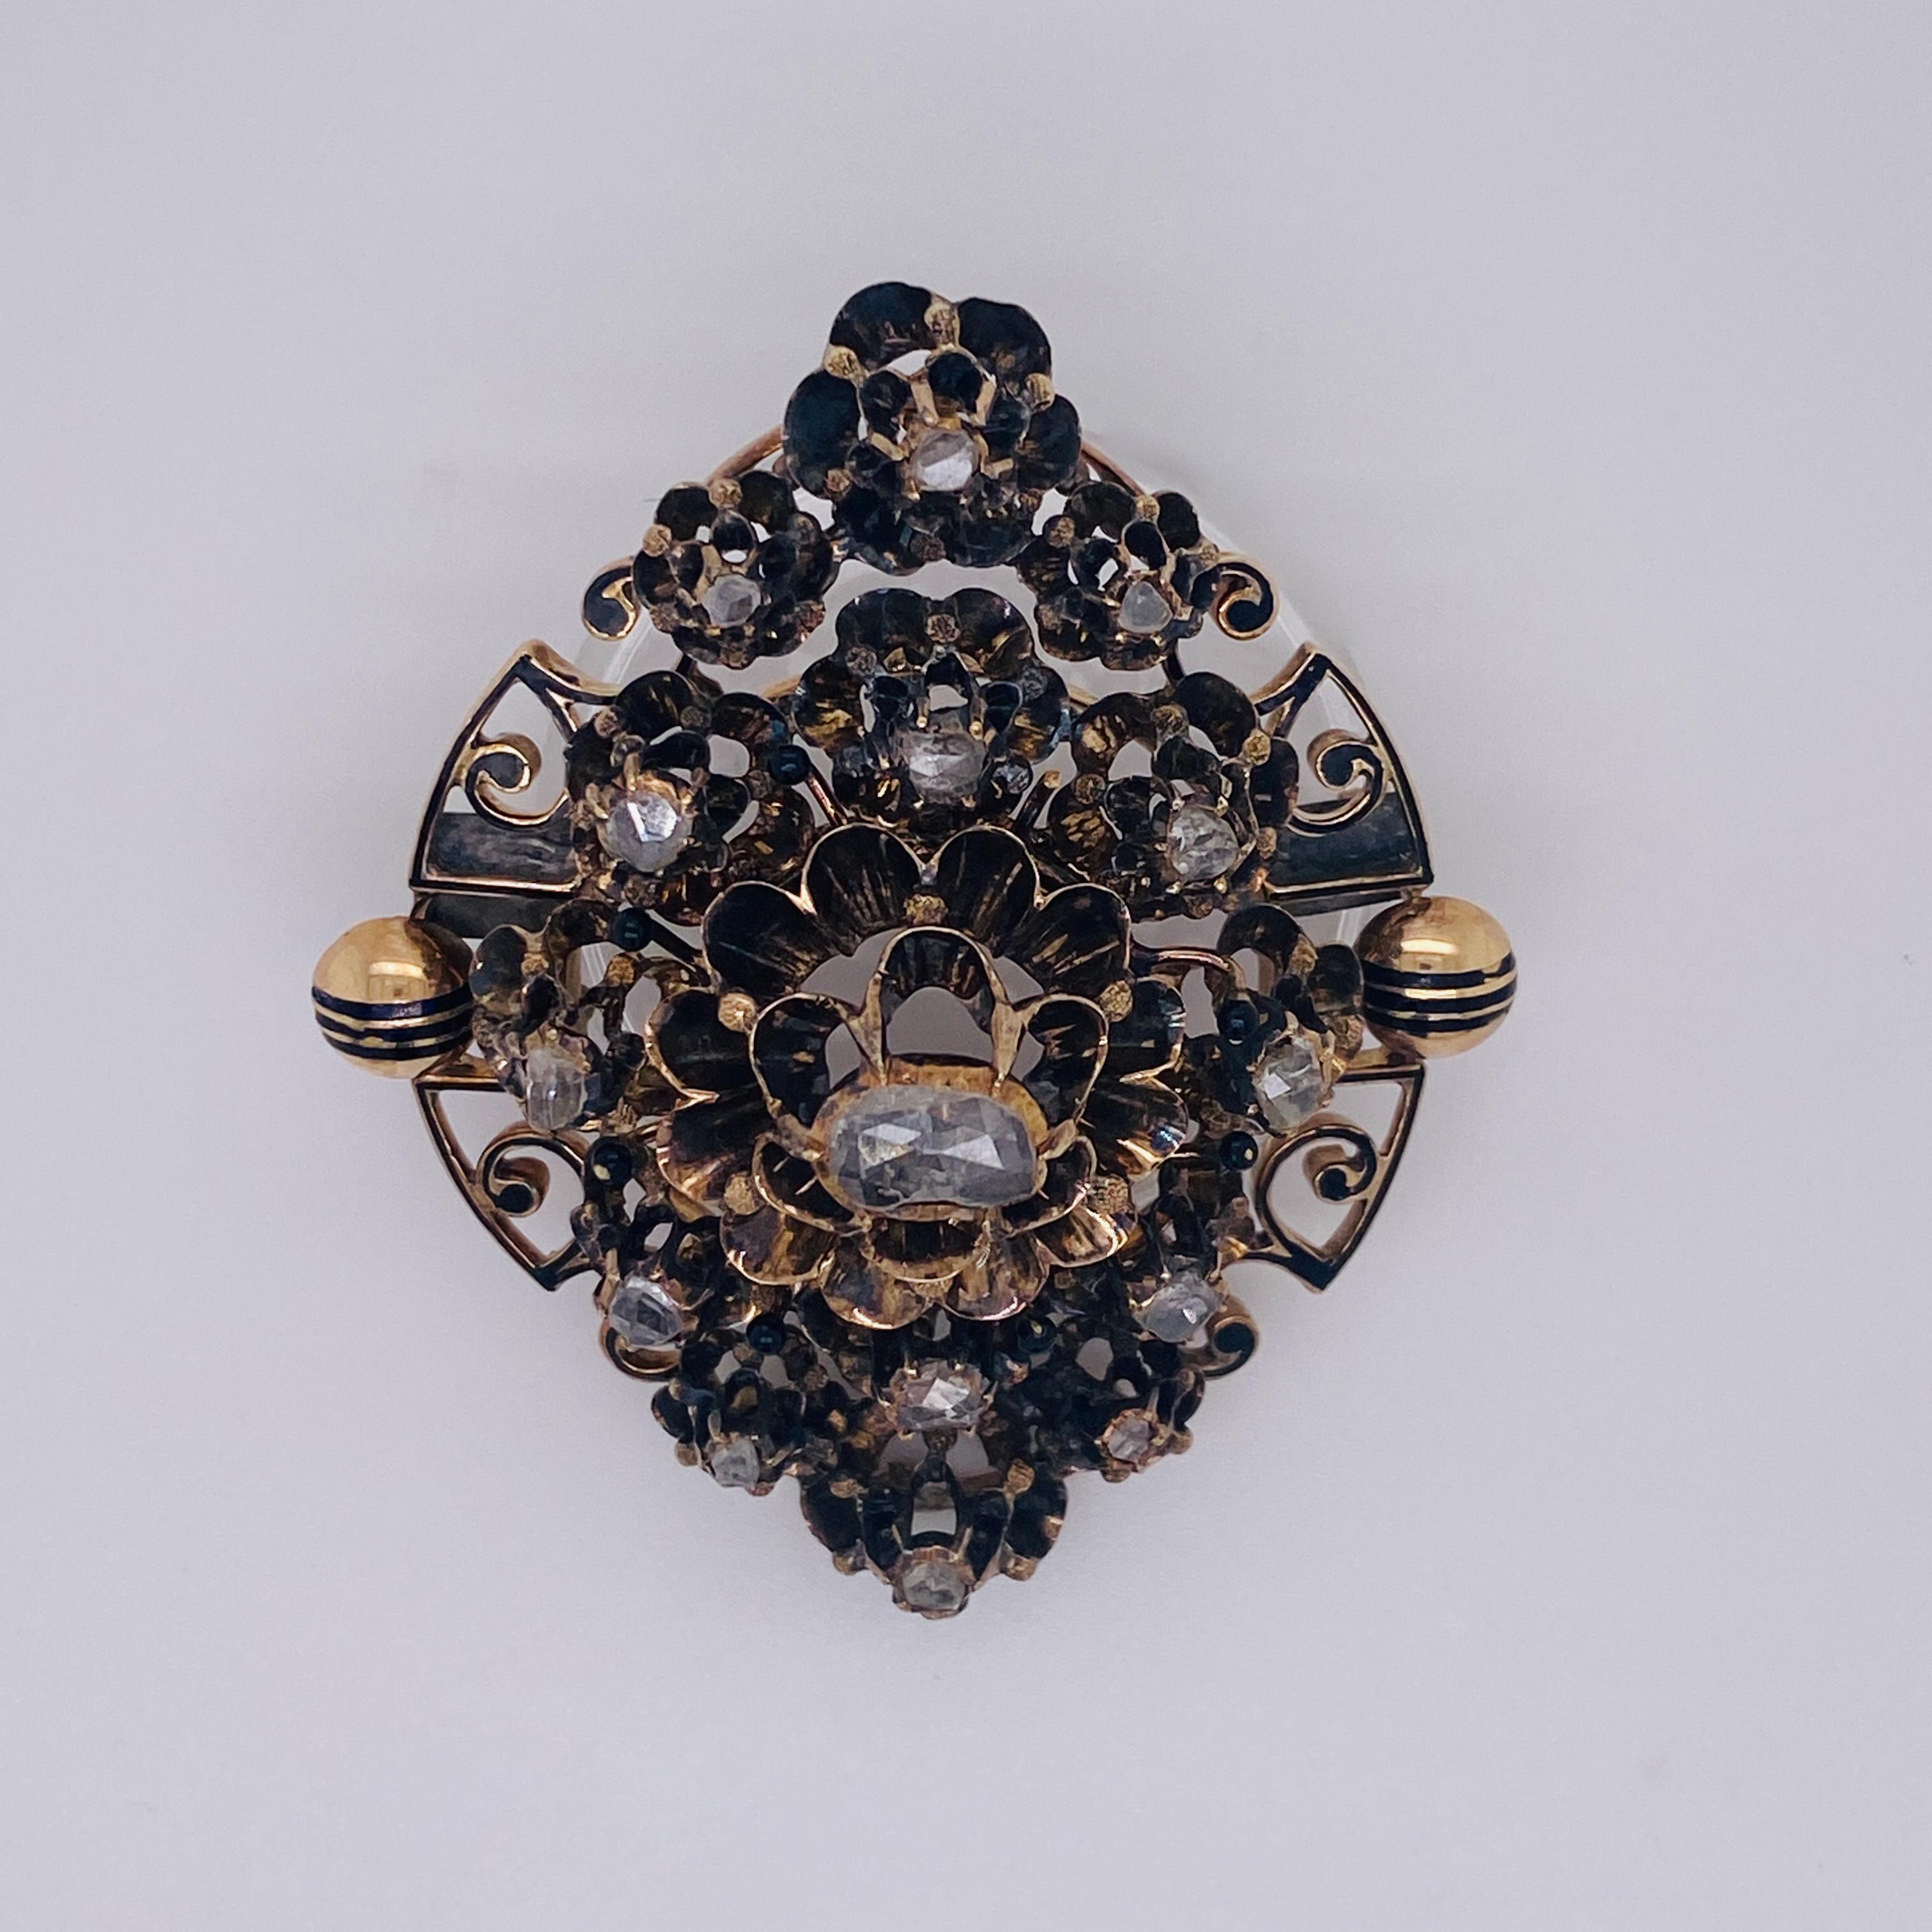 CIRCA 1800’s Rose cut Diamond Brooch
This is very special piece meant for someone equally as special. It takes a true vintage jewelry connoisseur to really appreciate the history of this fine brooch. This brooch is made of 10 karat gold and rose cut